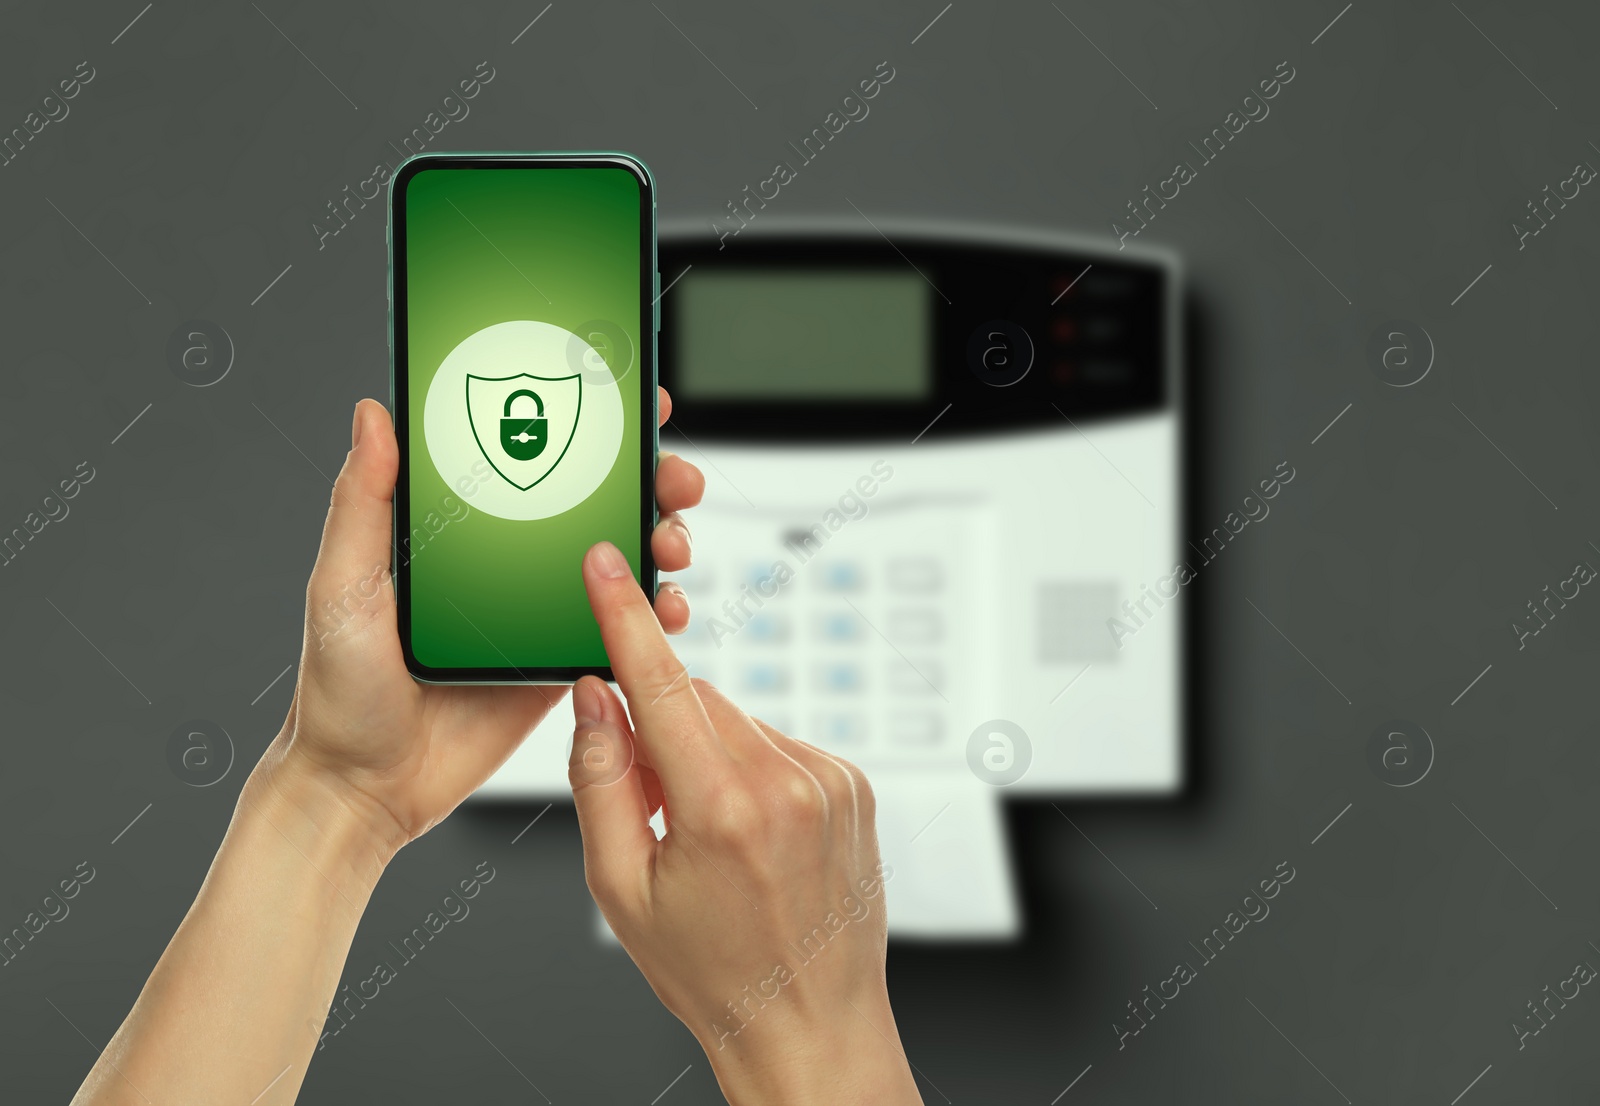 Image of Woman operating home alarm system via mobile phone against dark wall with security control panel, closeup. Application with illustration of padlock in shield on device screen